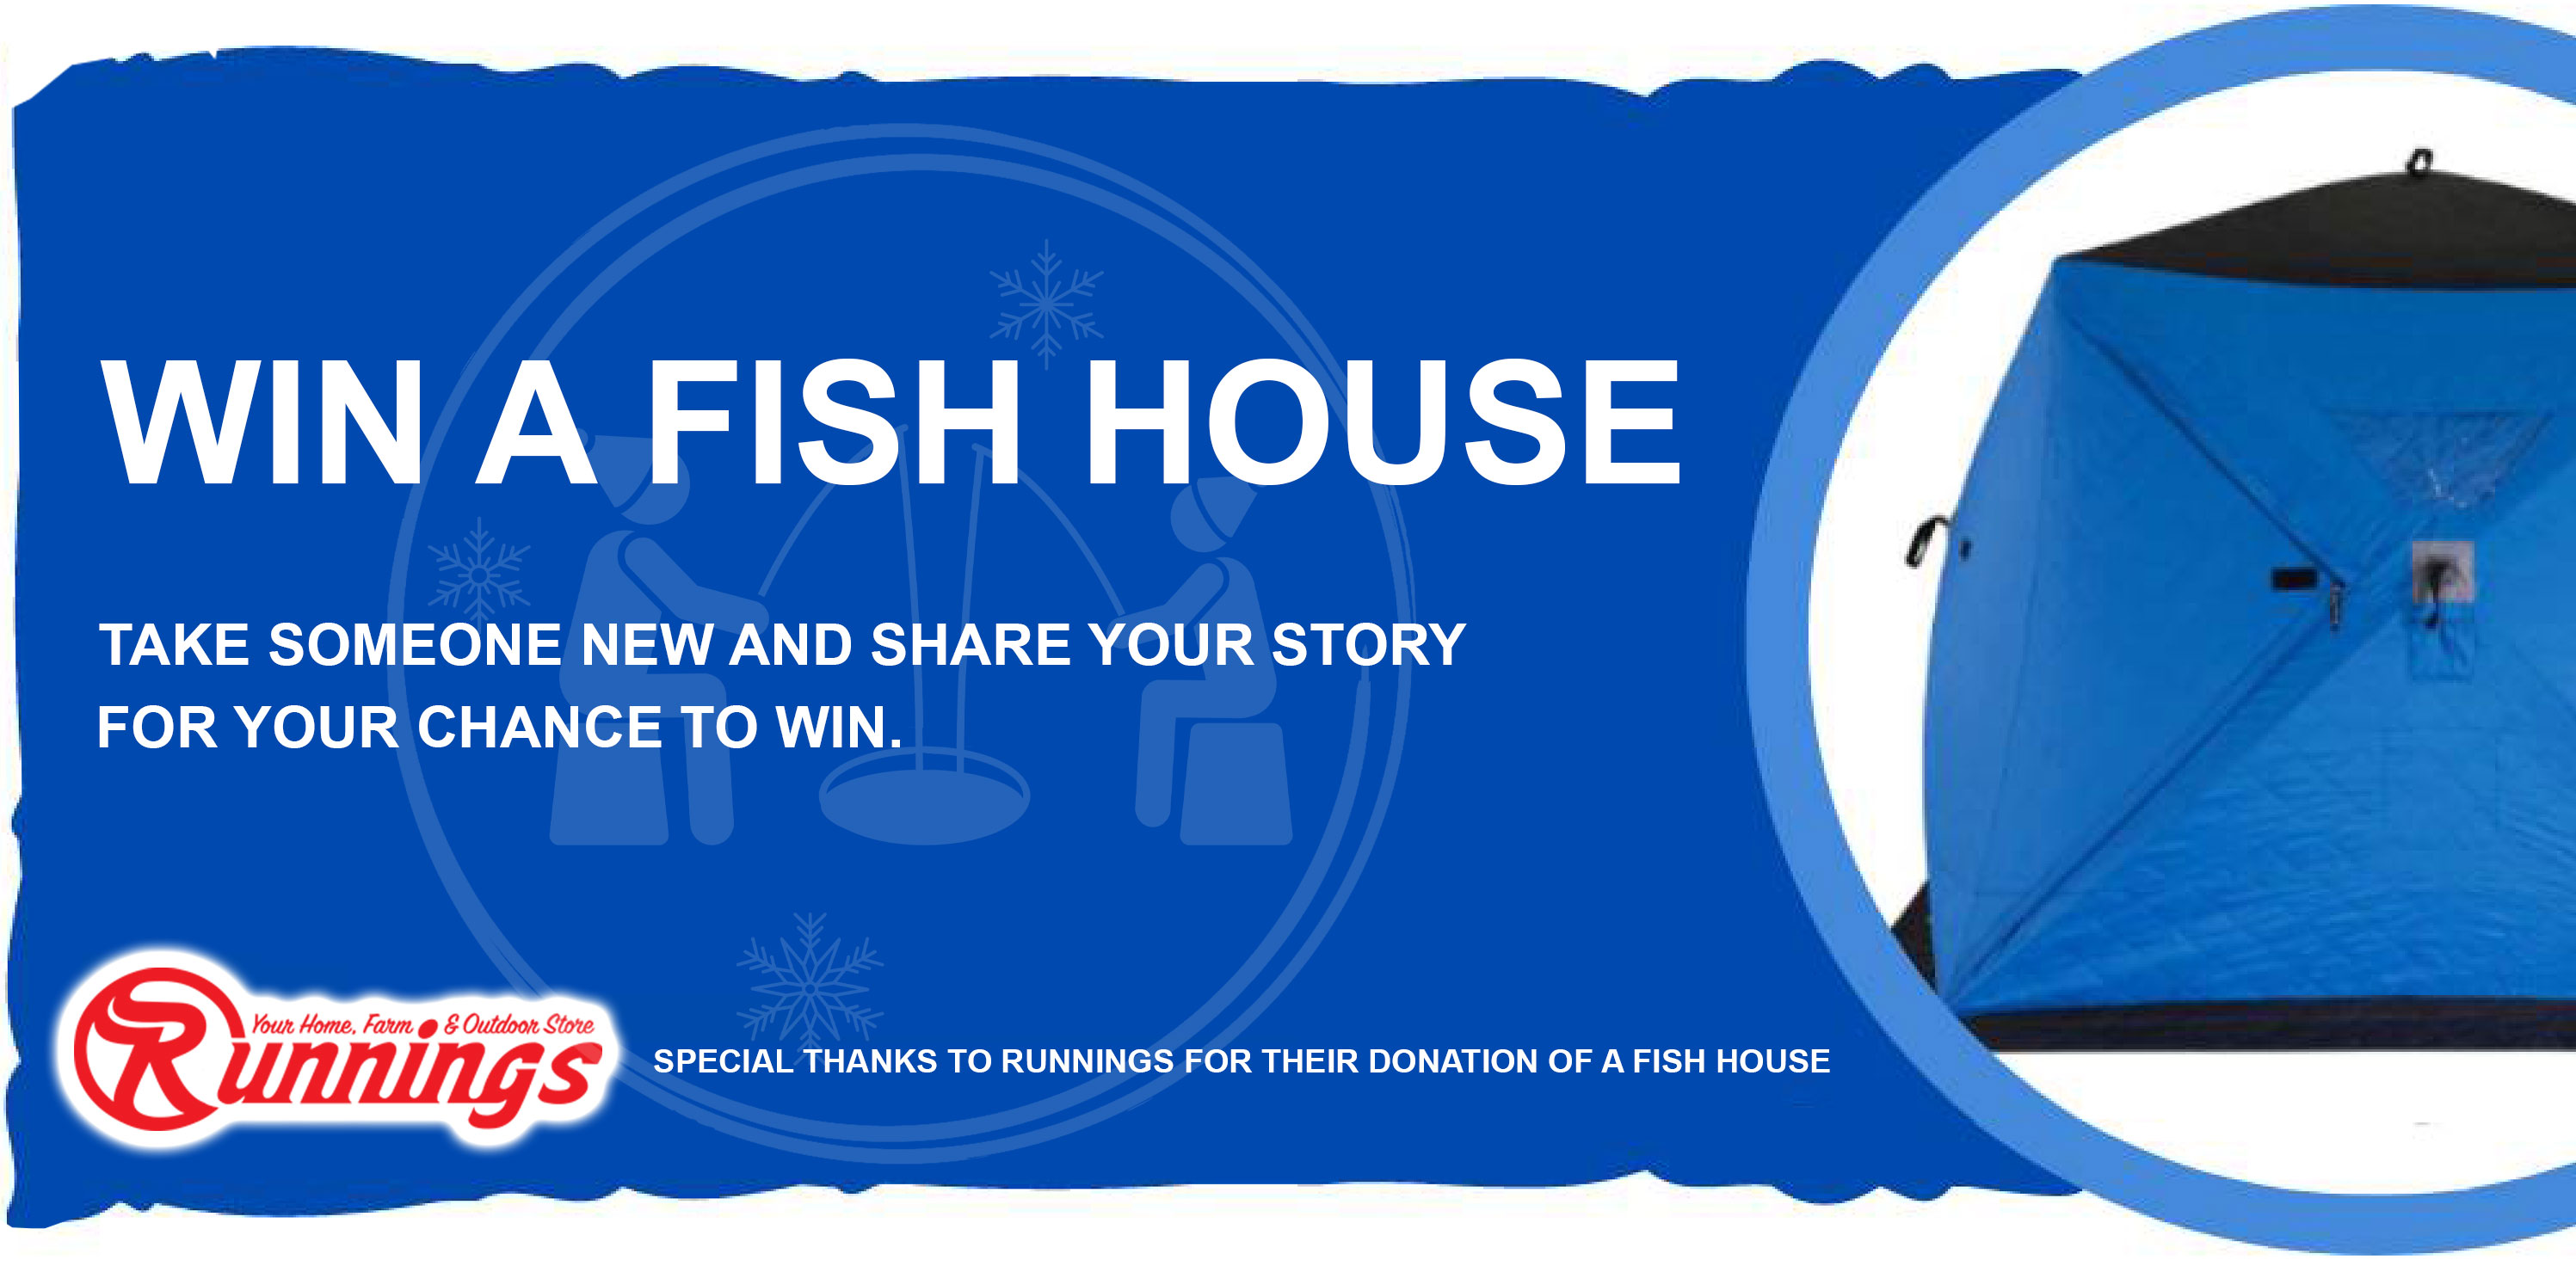 Ice house with promo text to the side. A special thanks to Running for their donation of a fish house.